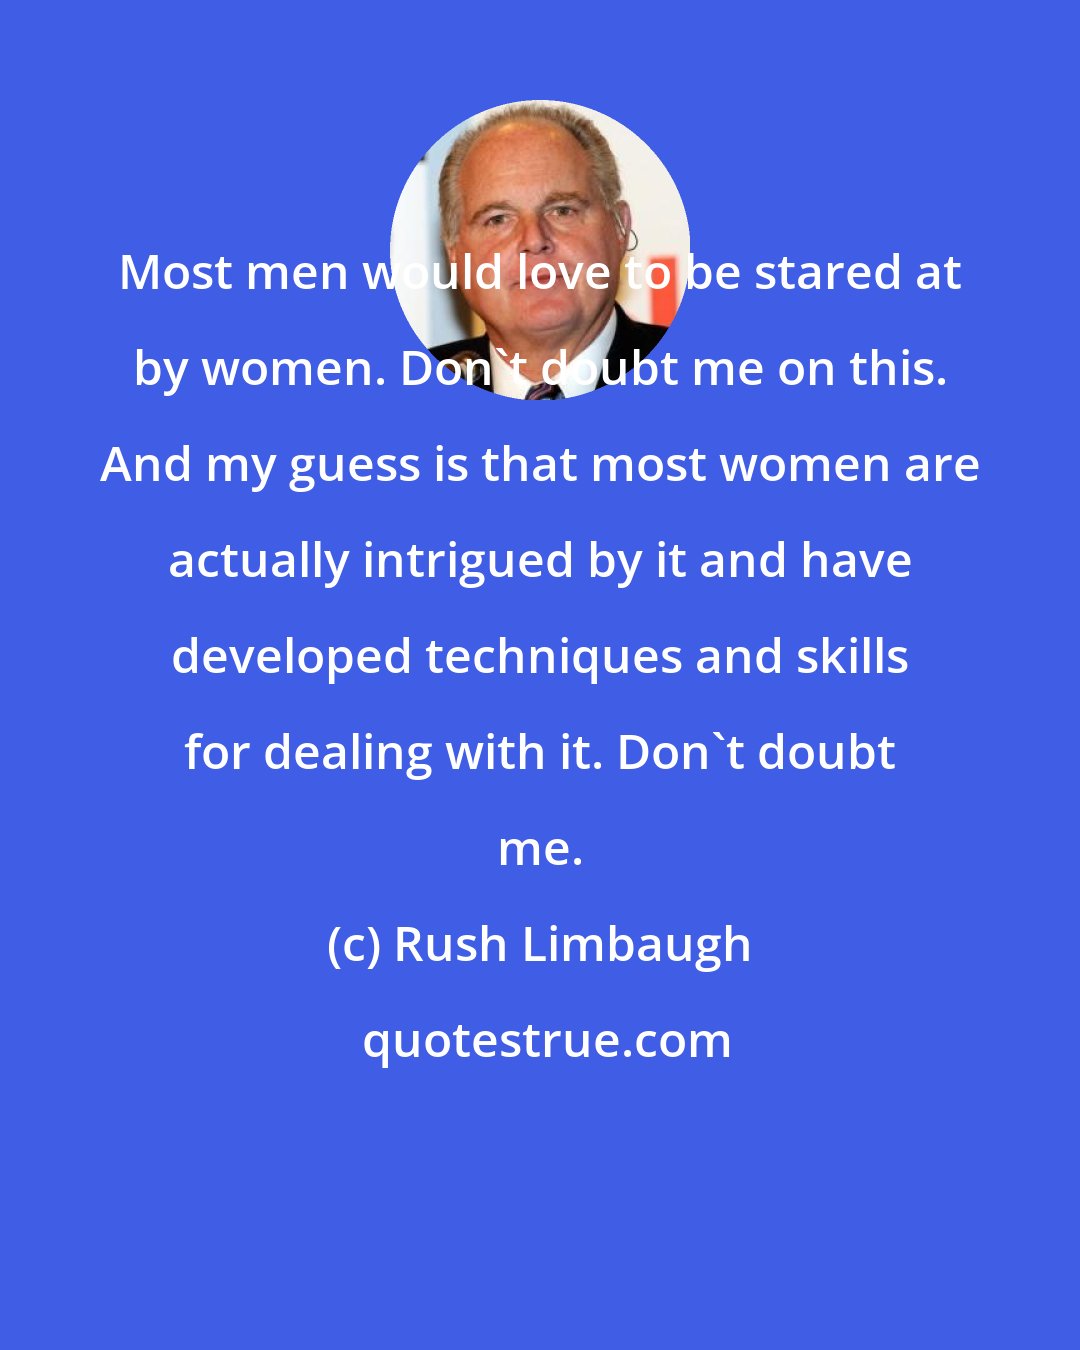 Rush Limbaugh: Most men would love to be stared at by women. Don't doubt me on this. And my guess is that most women are actually intrigued by it and have developed techniques and skills for dealing with it. Don't doubt me.